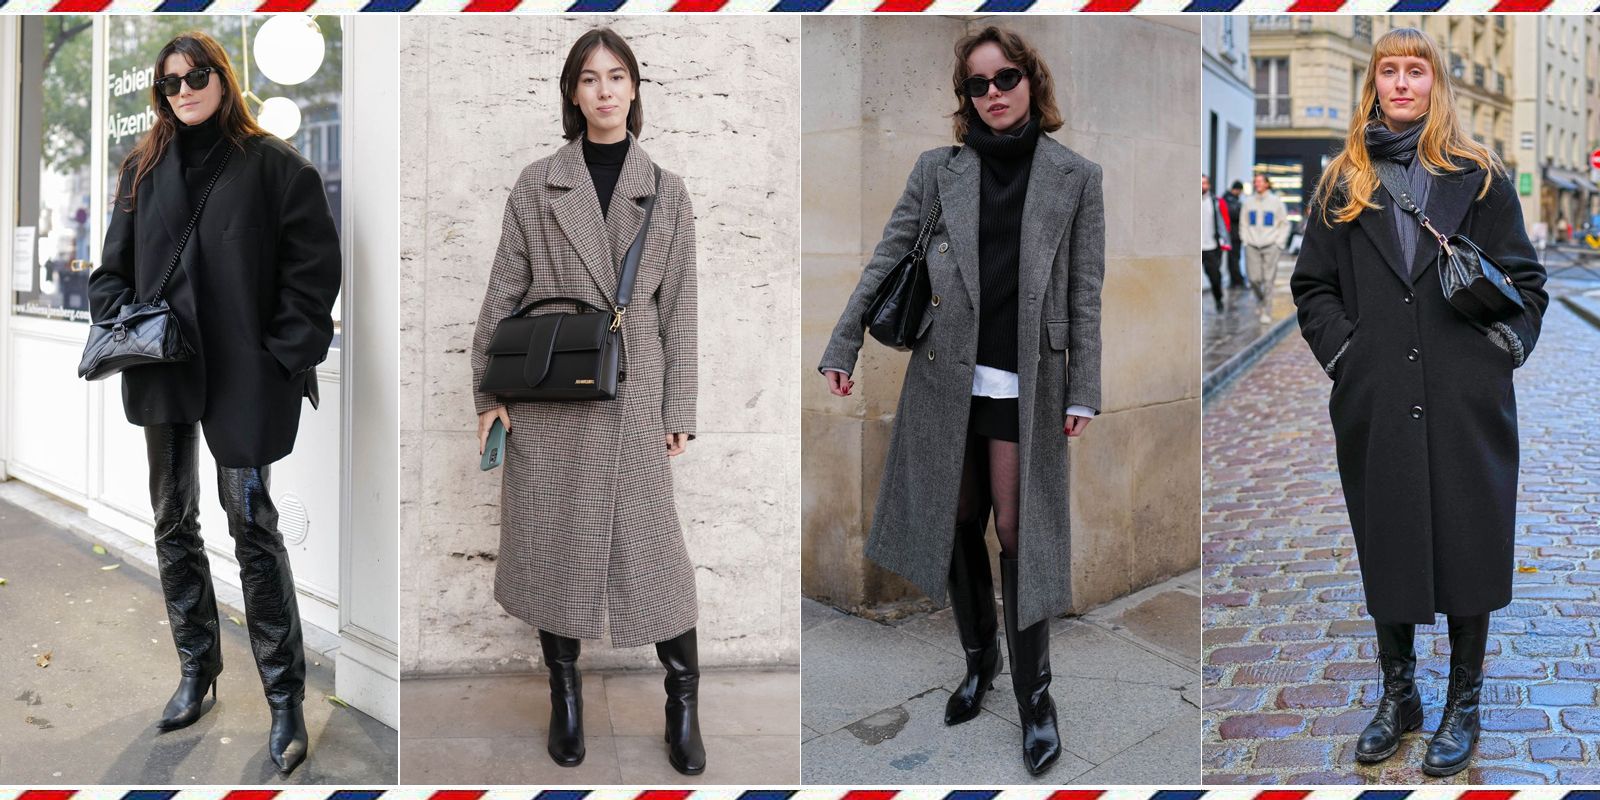 a collage of a person in a trench coat and sunglasses